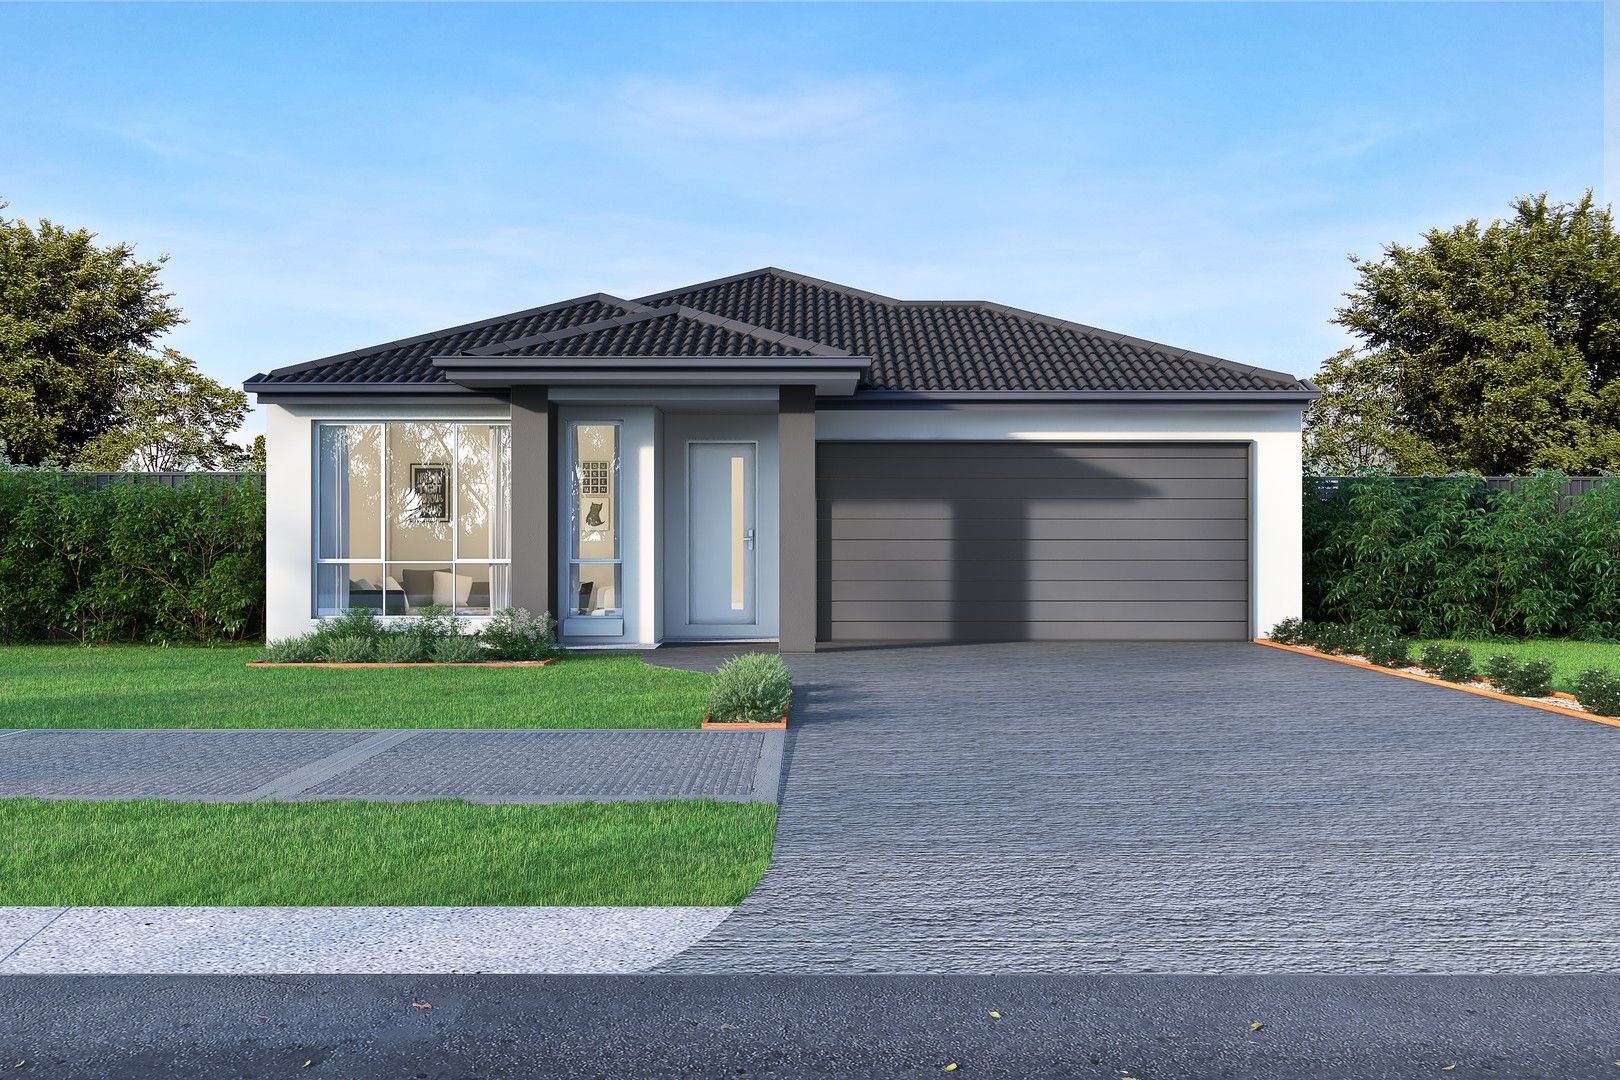 4 bedrooms New House & Land in 110 Newbolt St CLYDE NORTH VIC, 3978